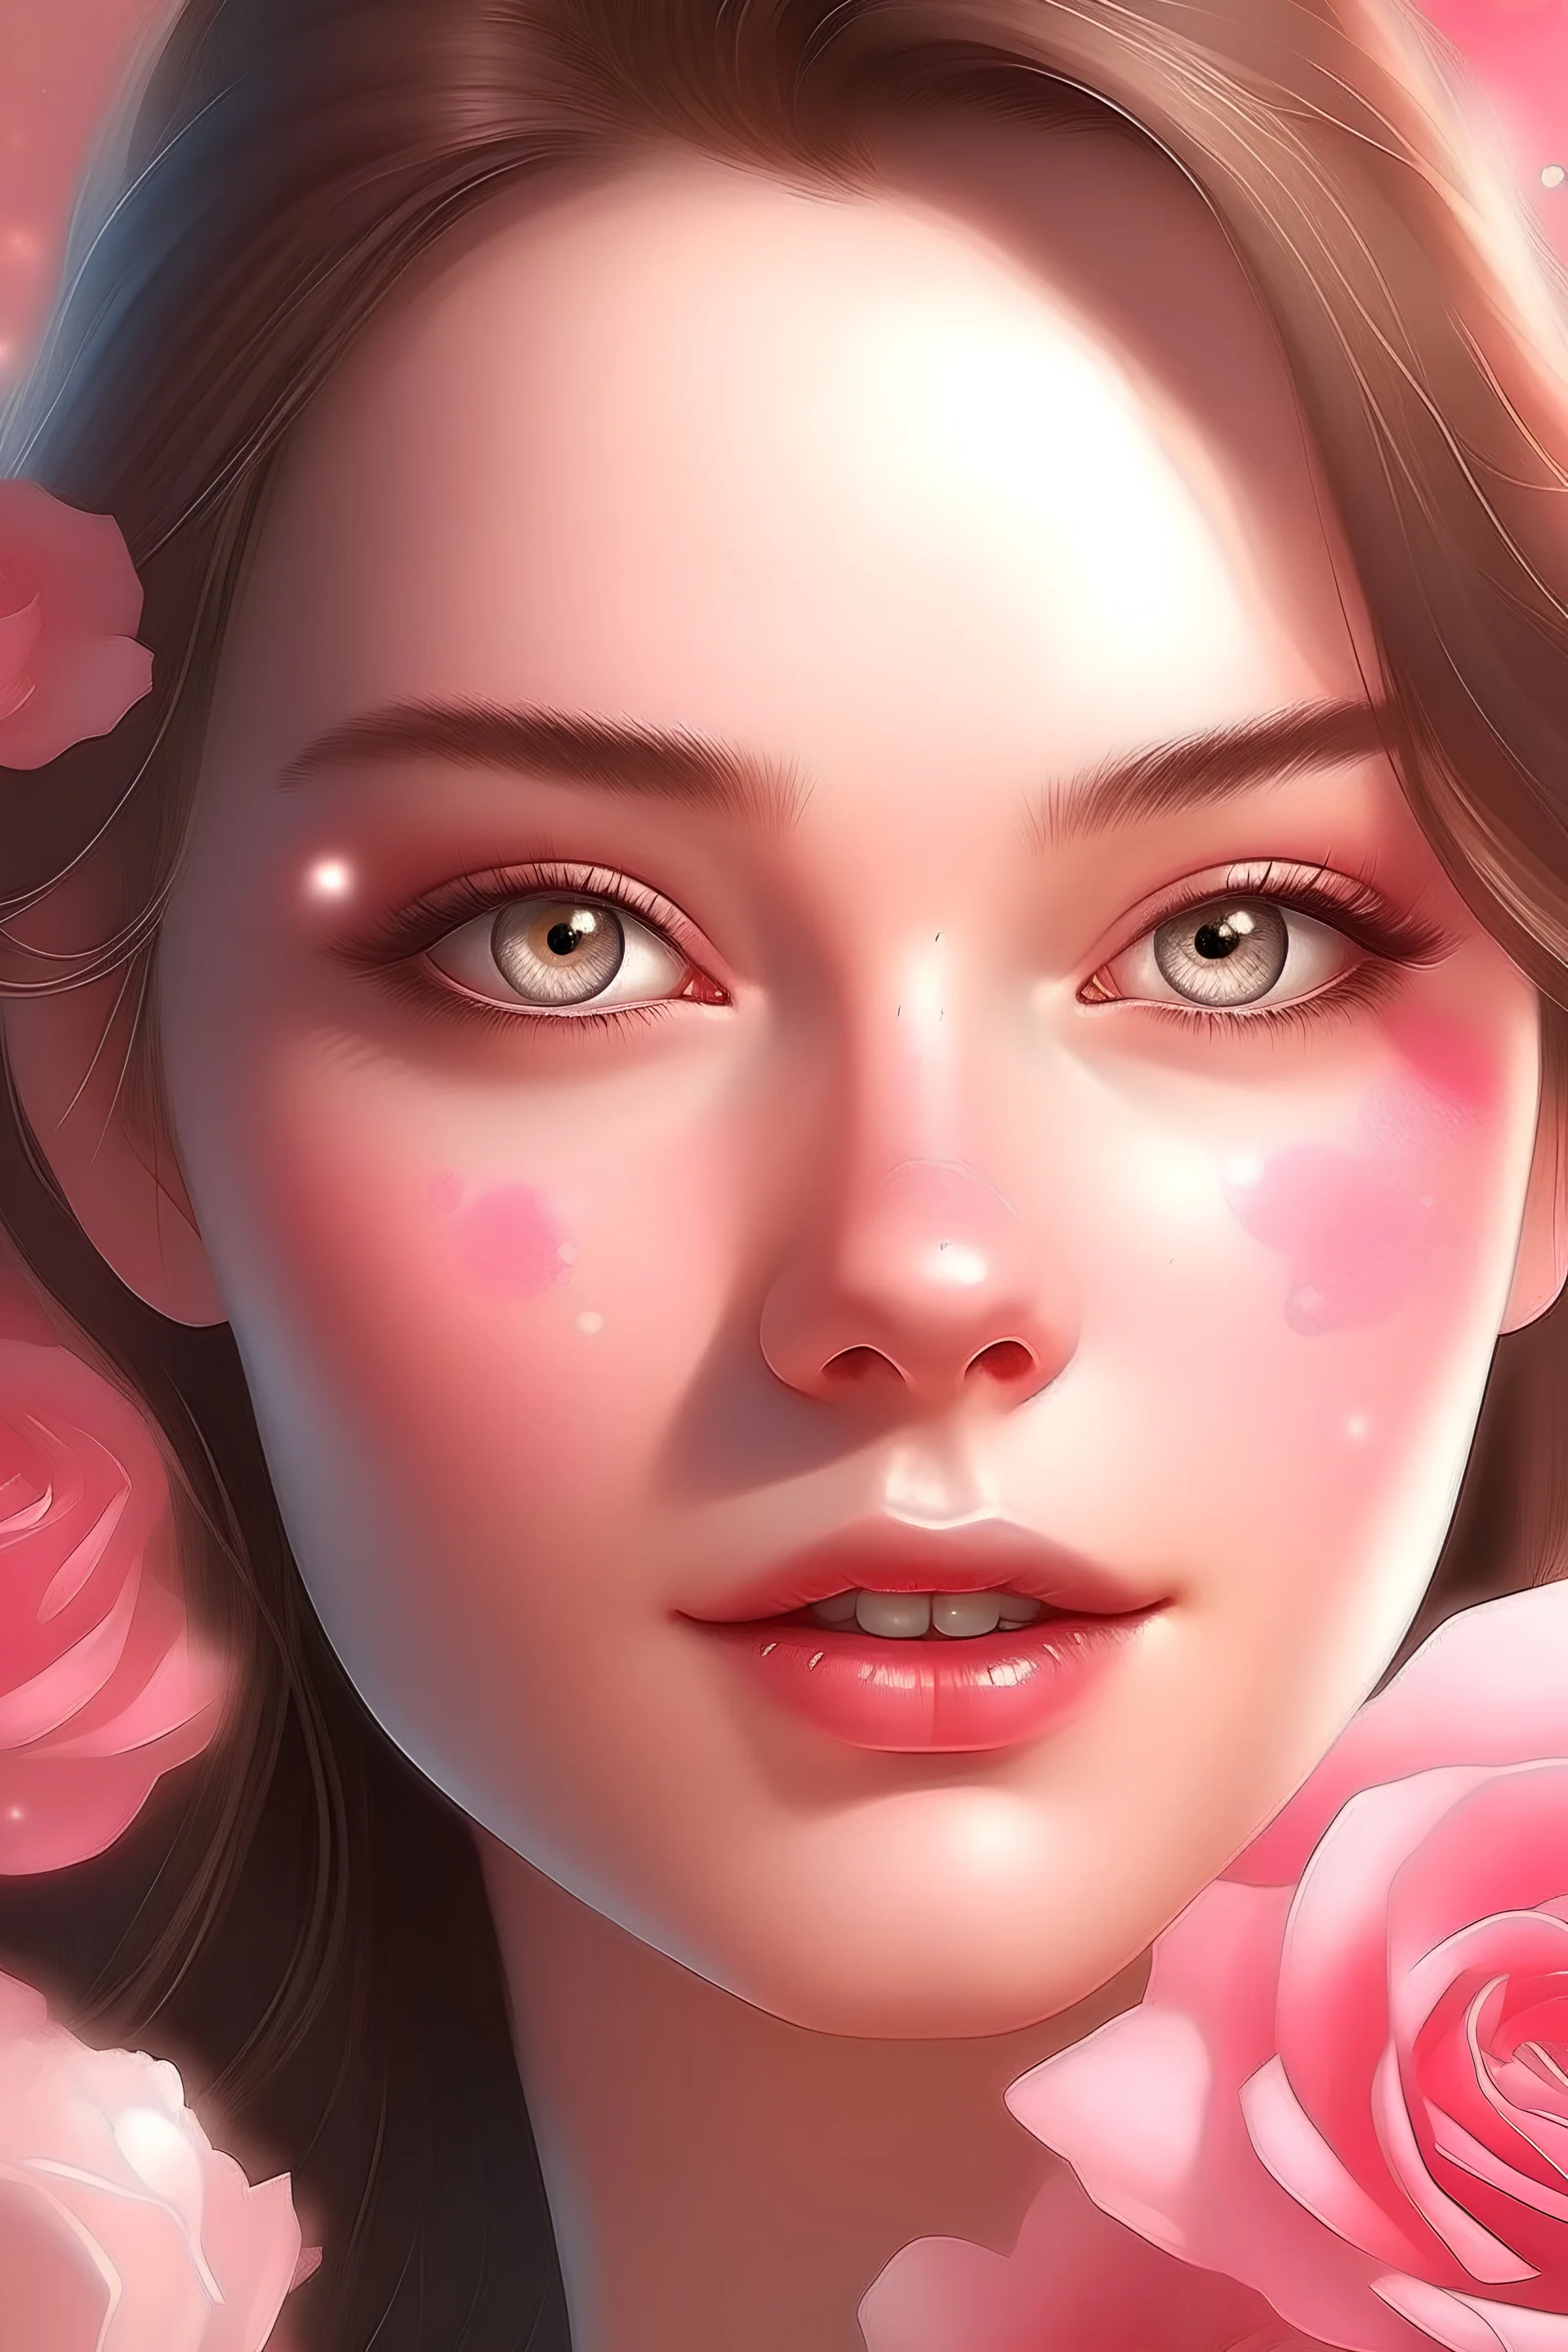 Start by creating a background layer of clear, glowing skin. You can use the color picker or drawing tools to create a smooth, radiant complexion.Use various shapes and shades to depict rose petals gently scattered or arranged on the skin. Incorporate soft, pastel colors for a natural and attractive look. Consider layering petals to create depth and realism.Add finer details such as dew drops on the petals or a subtle shimmer on the skin to enhance the overall appeal and give it a more realistic